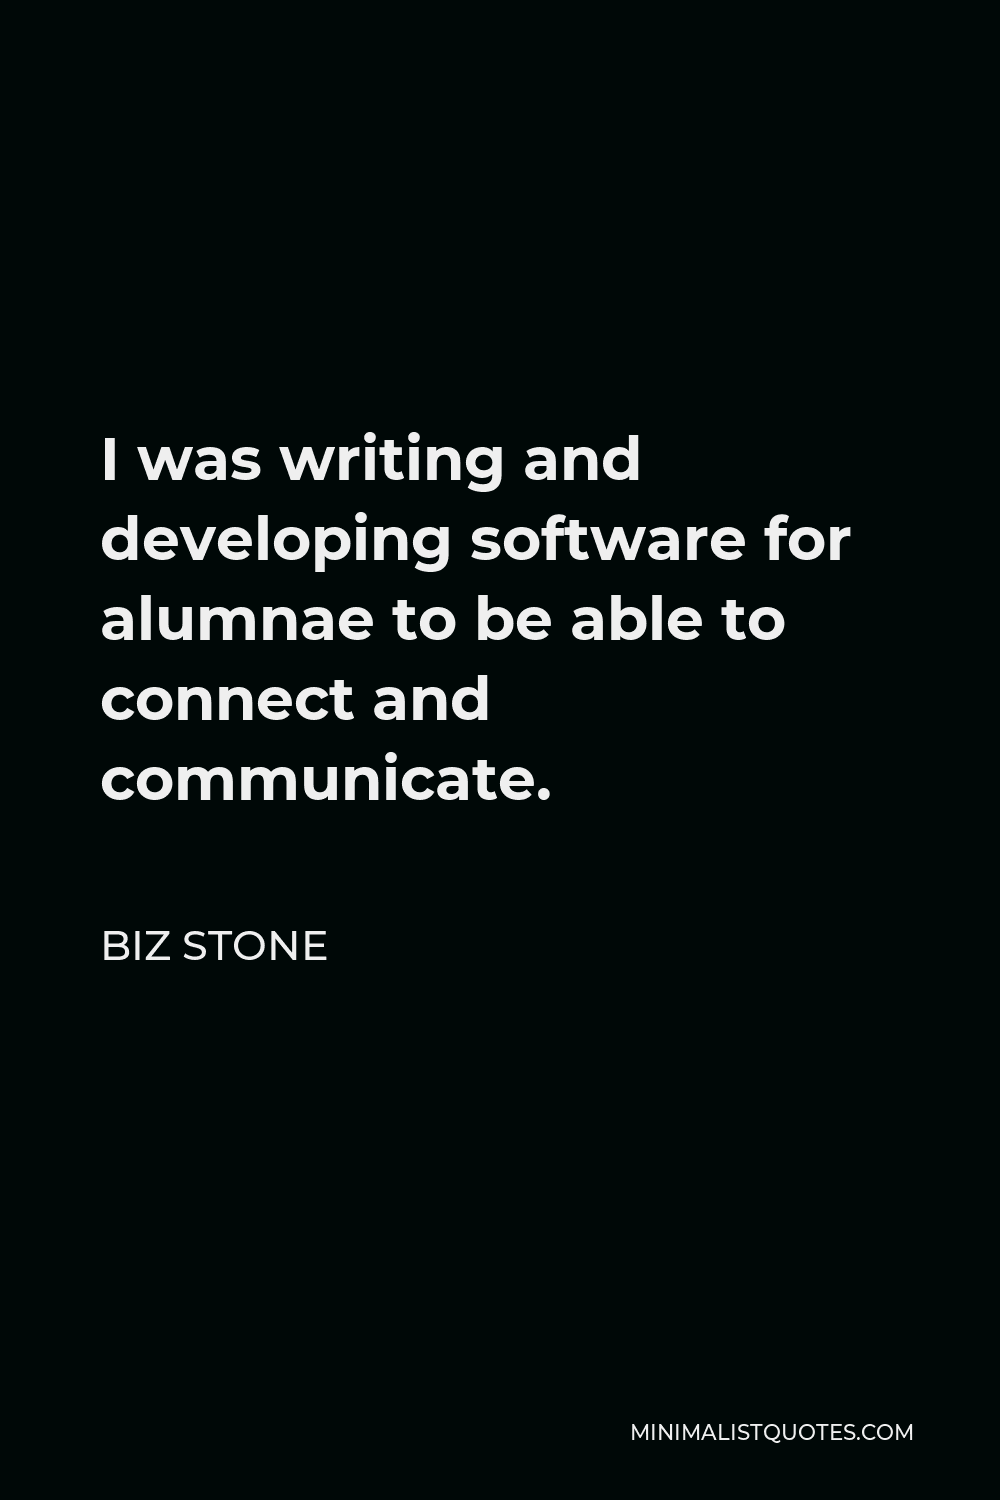 Biz Stone Quote - I was writing and developing software for alumnae to be able to connect and communicate.